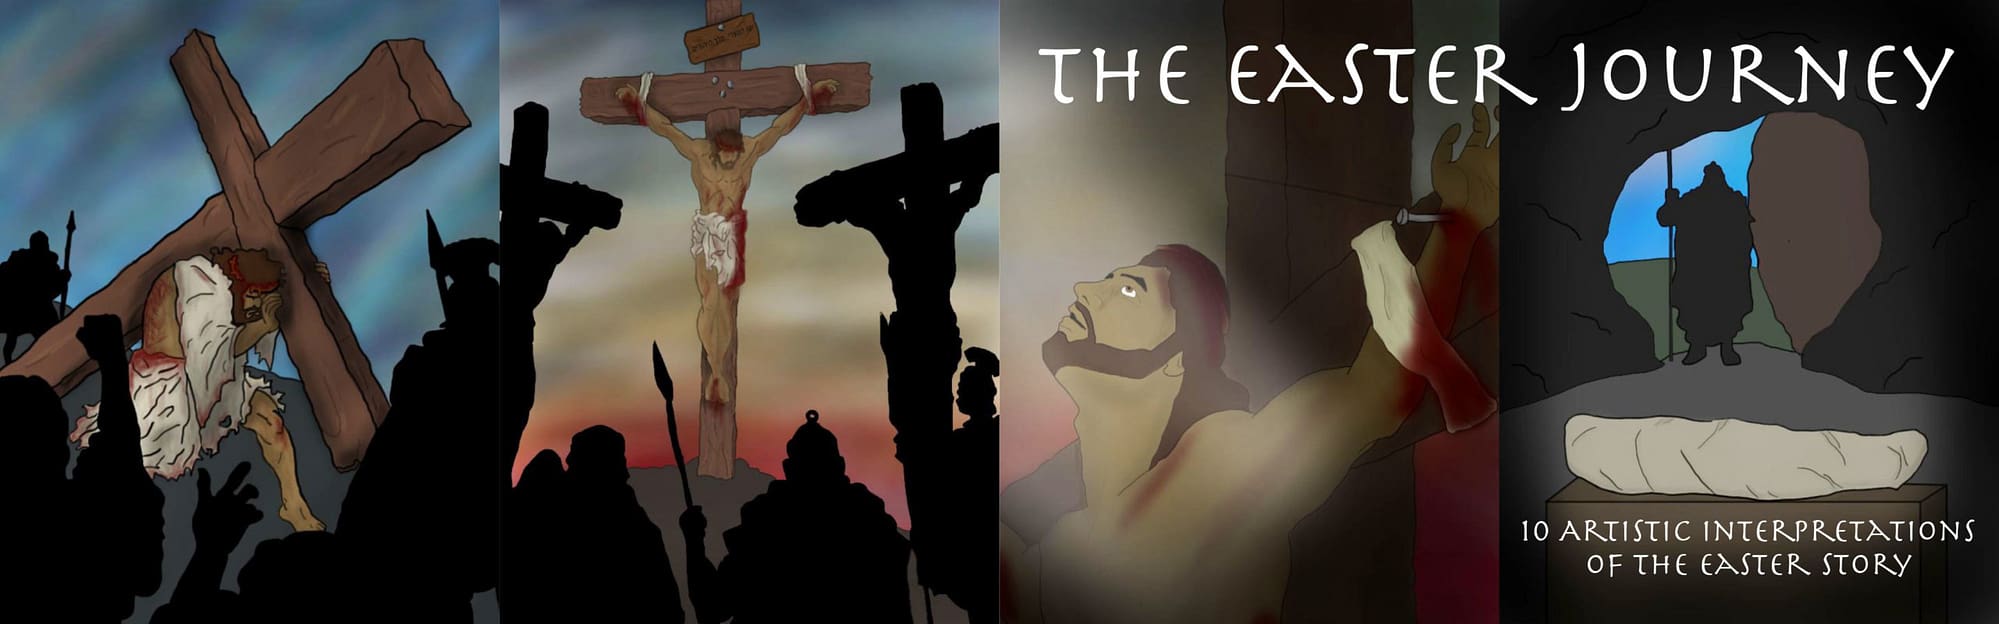 The Easter Journey: 10 artistic Interpretations of the Easter story